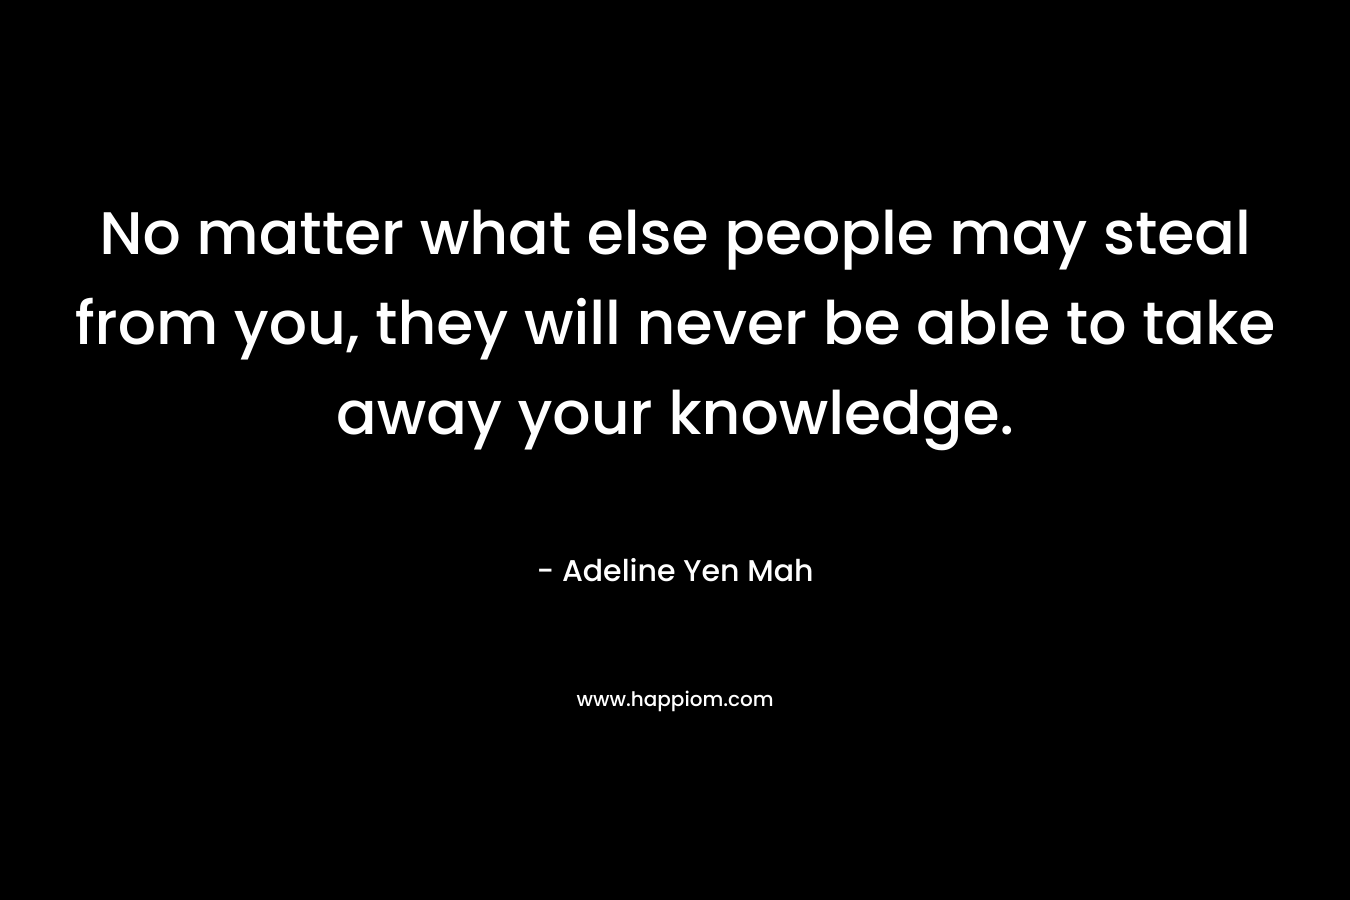 No matter what else people may steal from you, they will never be able to take away your knowledge.